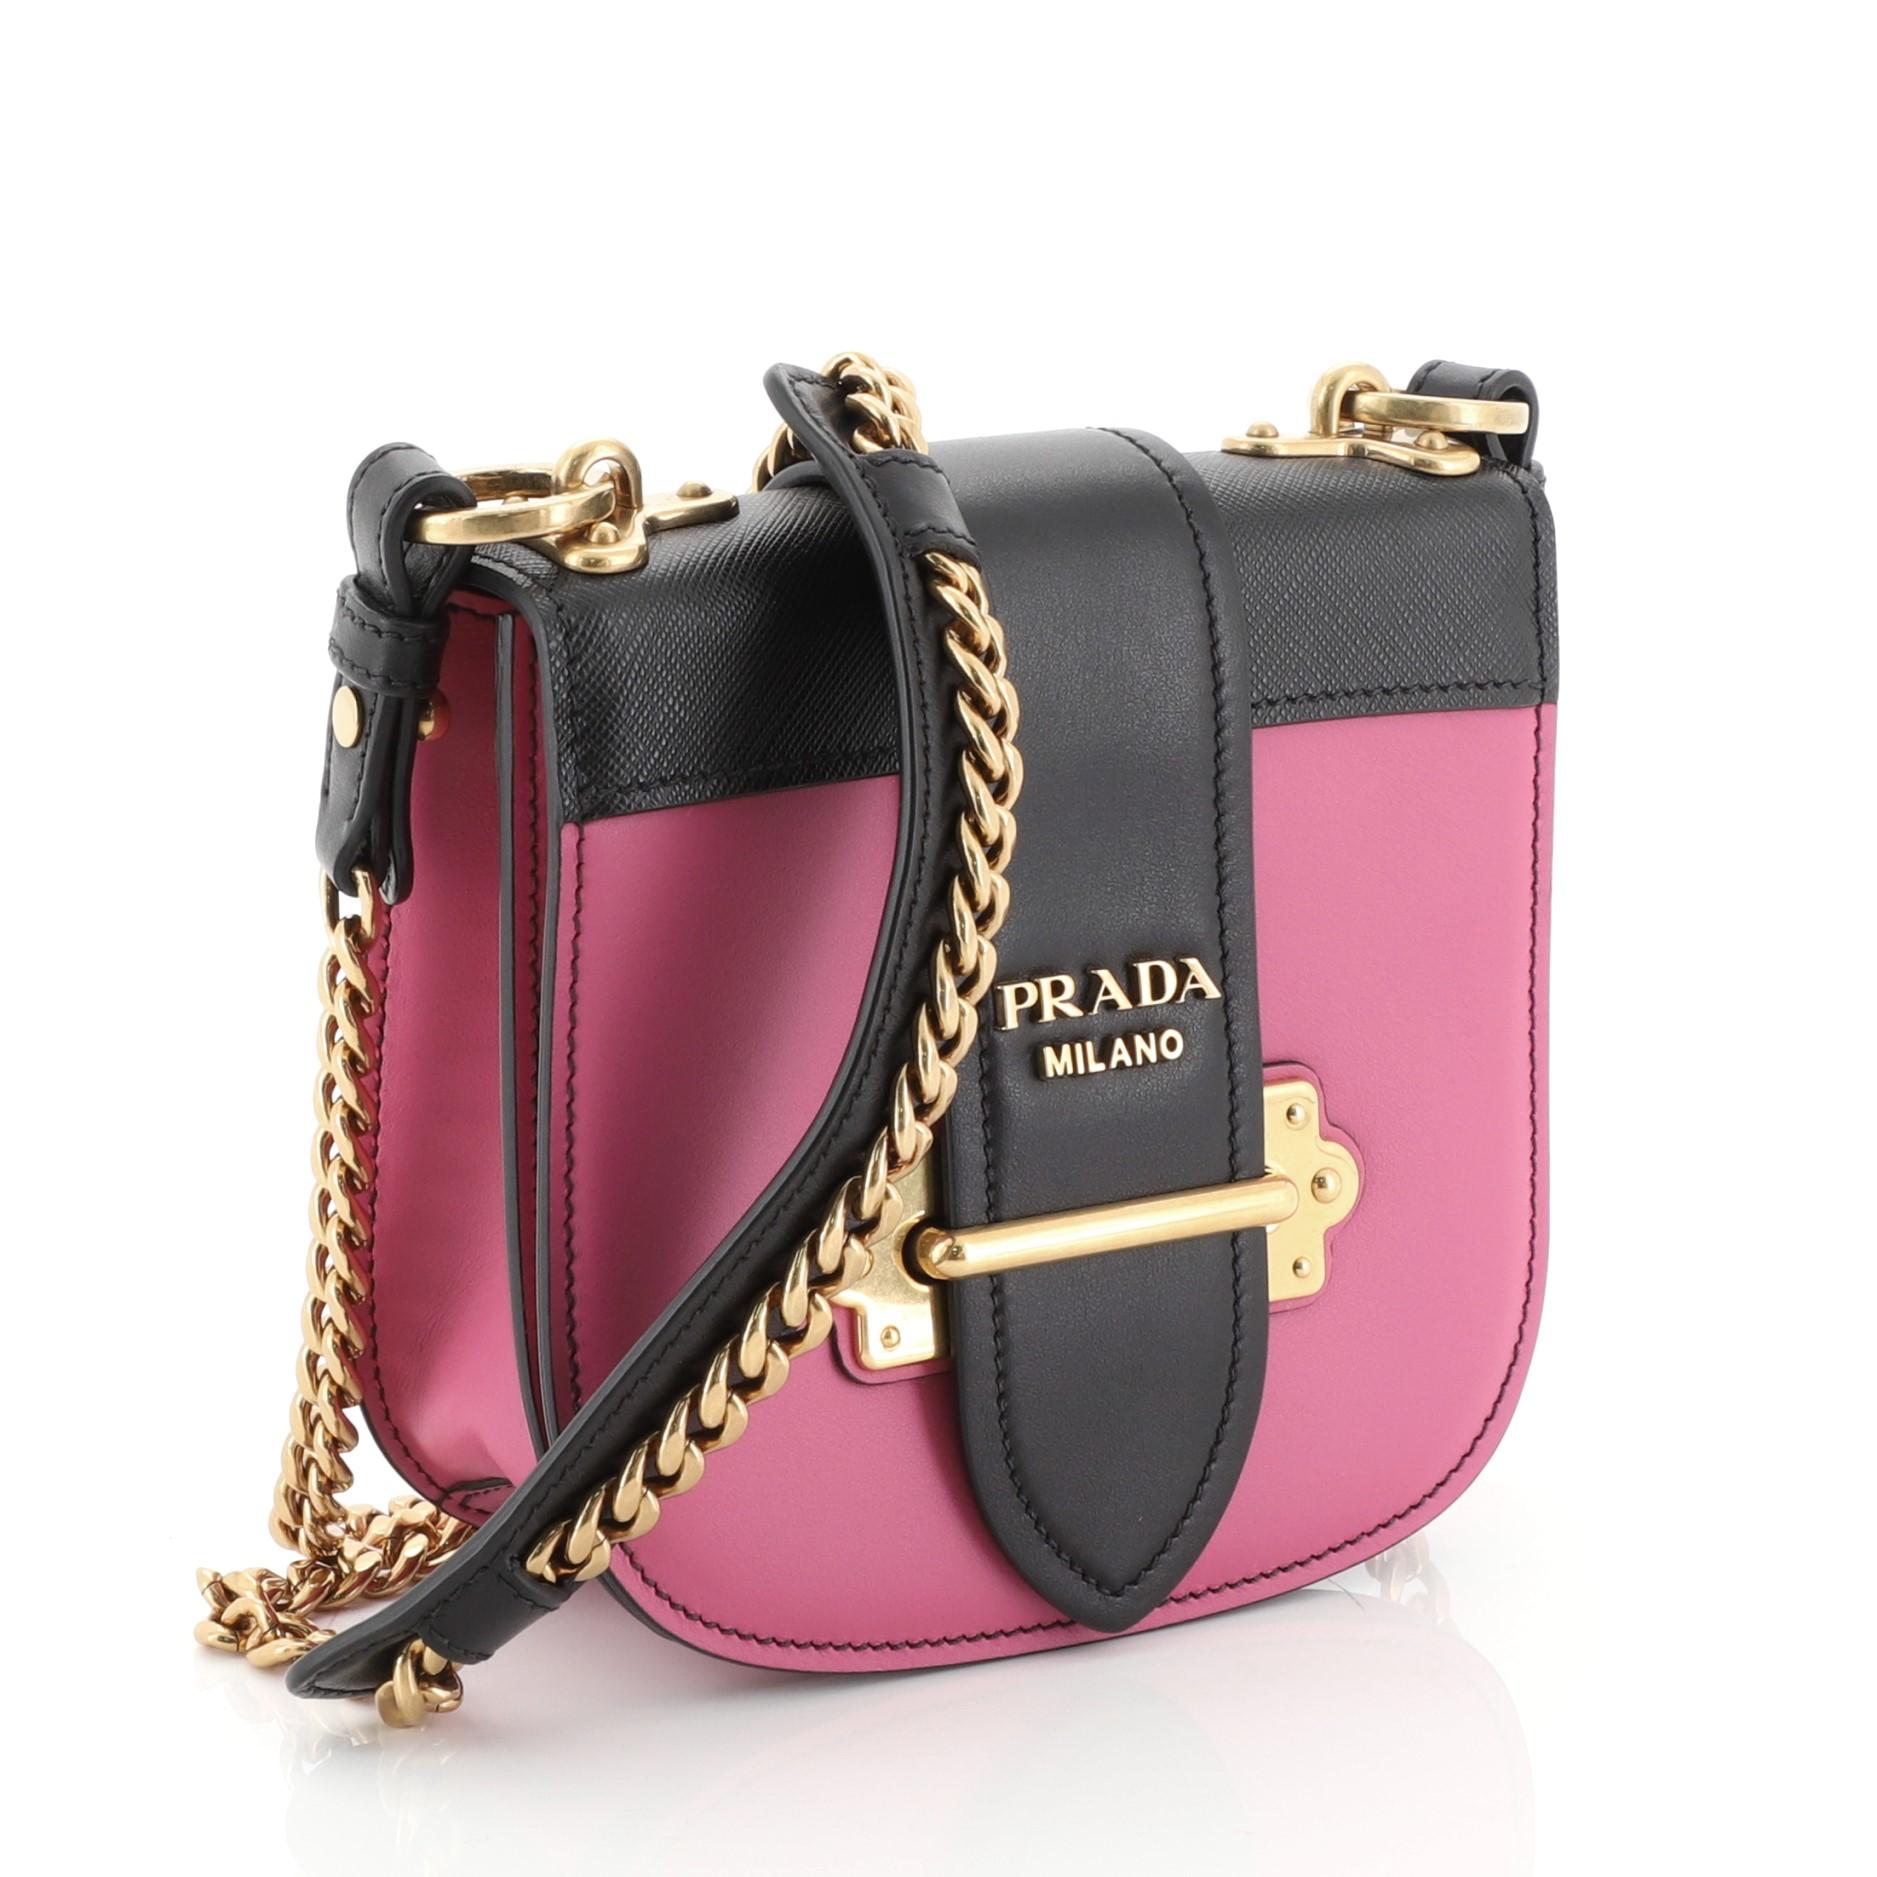 This Prada Pionniere Crossbody Bag City Calfskin with Saffiano Leather Small, crafted from pink city calf and saffiano leather, features adjustable shoulder strap, metal hardware trim, front flap and aged gold-tone hardware. Its buckle closure opens